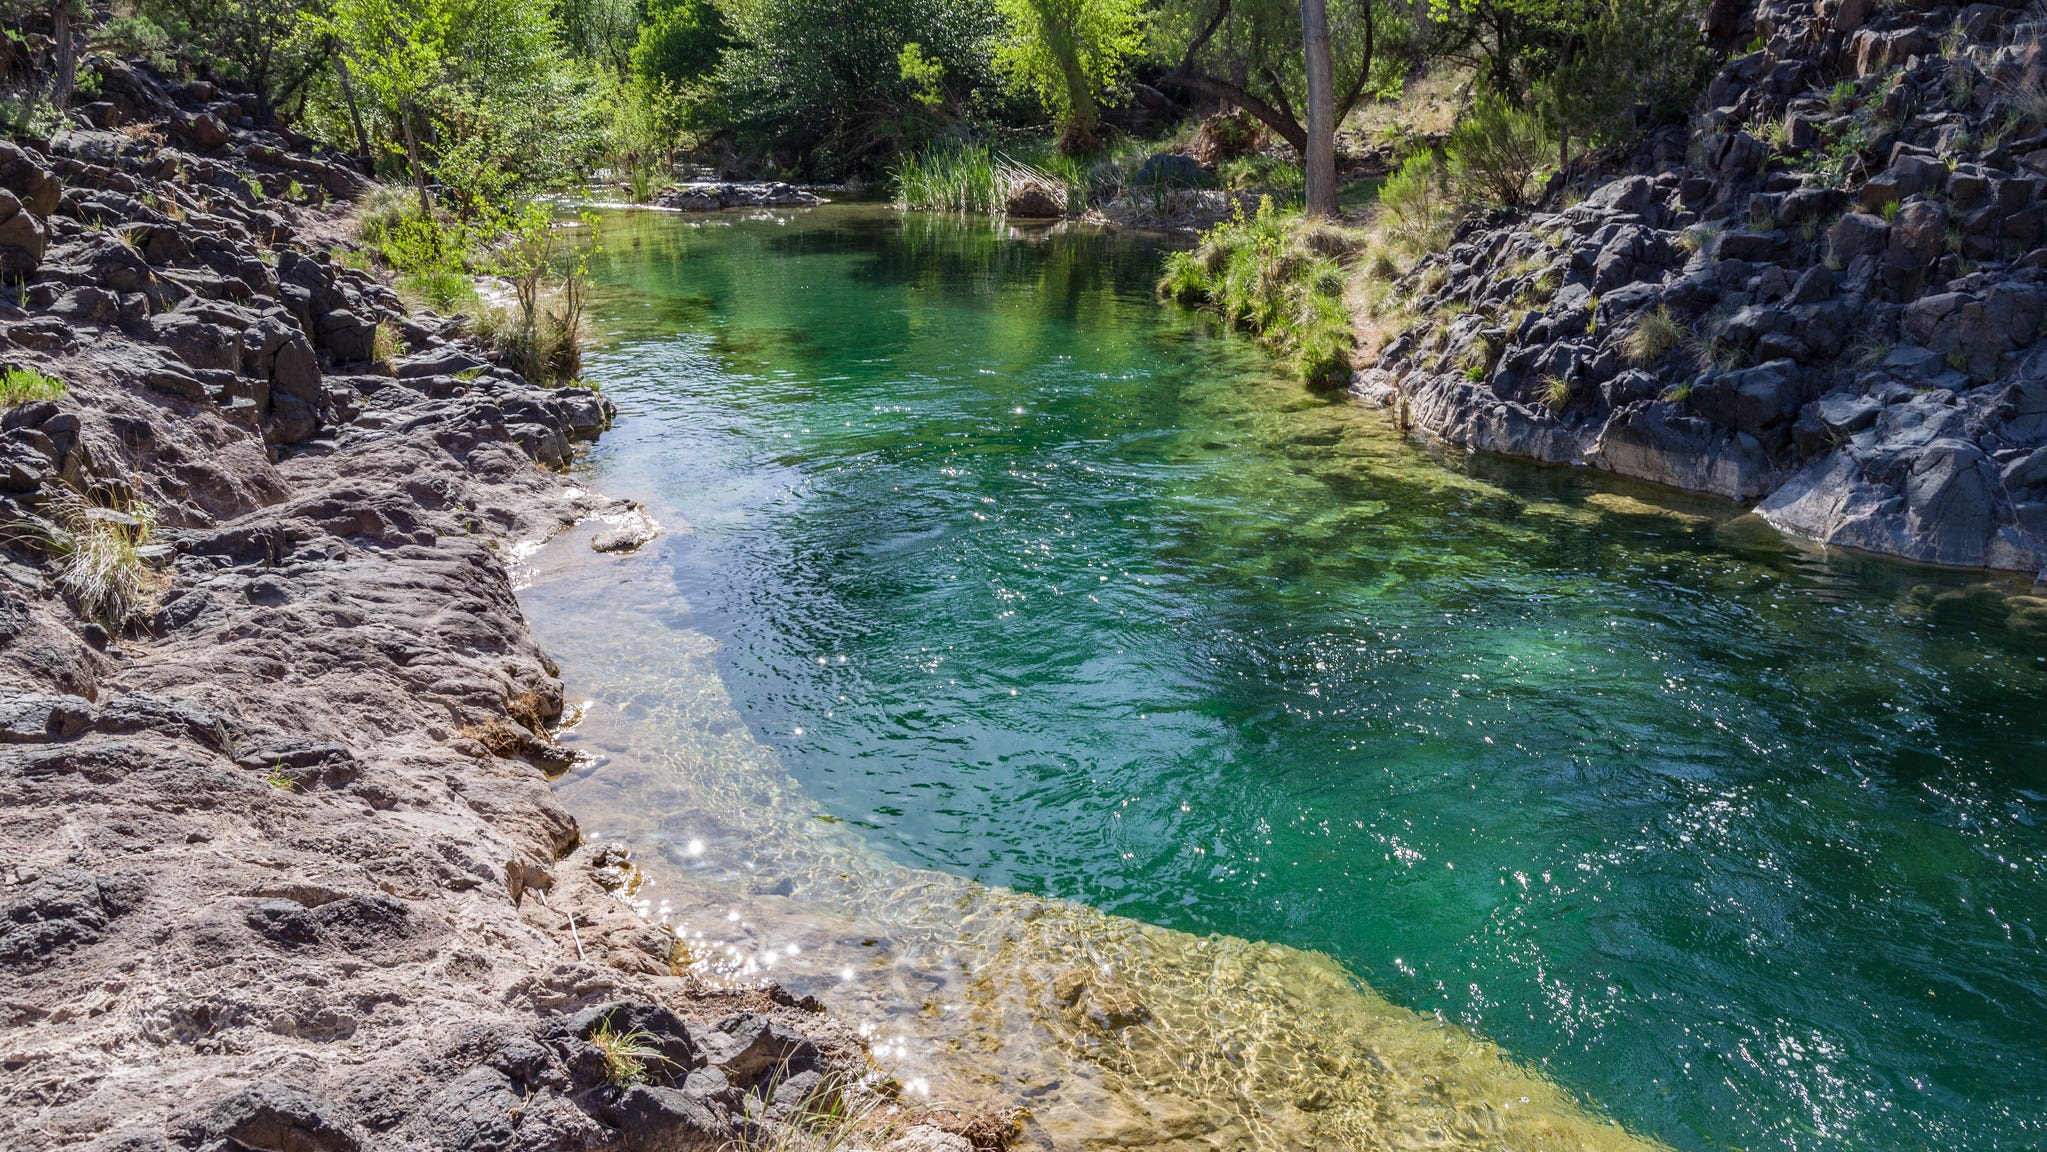 Bodies of 2 men found after drowning at Fossil Creek, Gila County sheriff's officials say